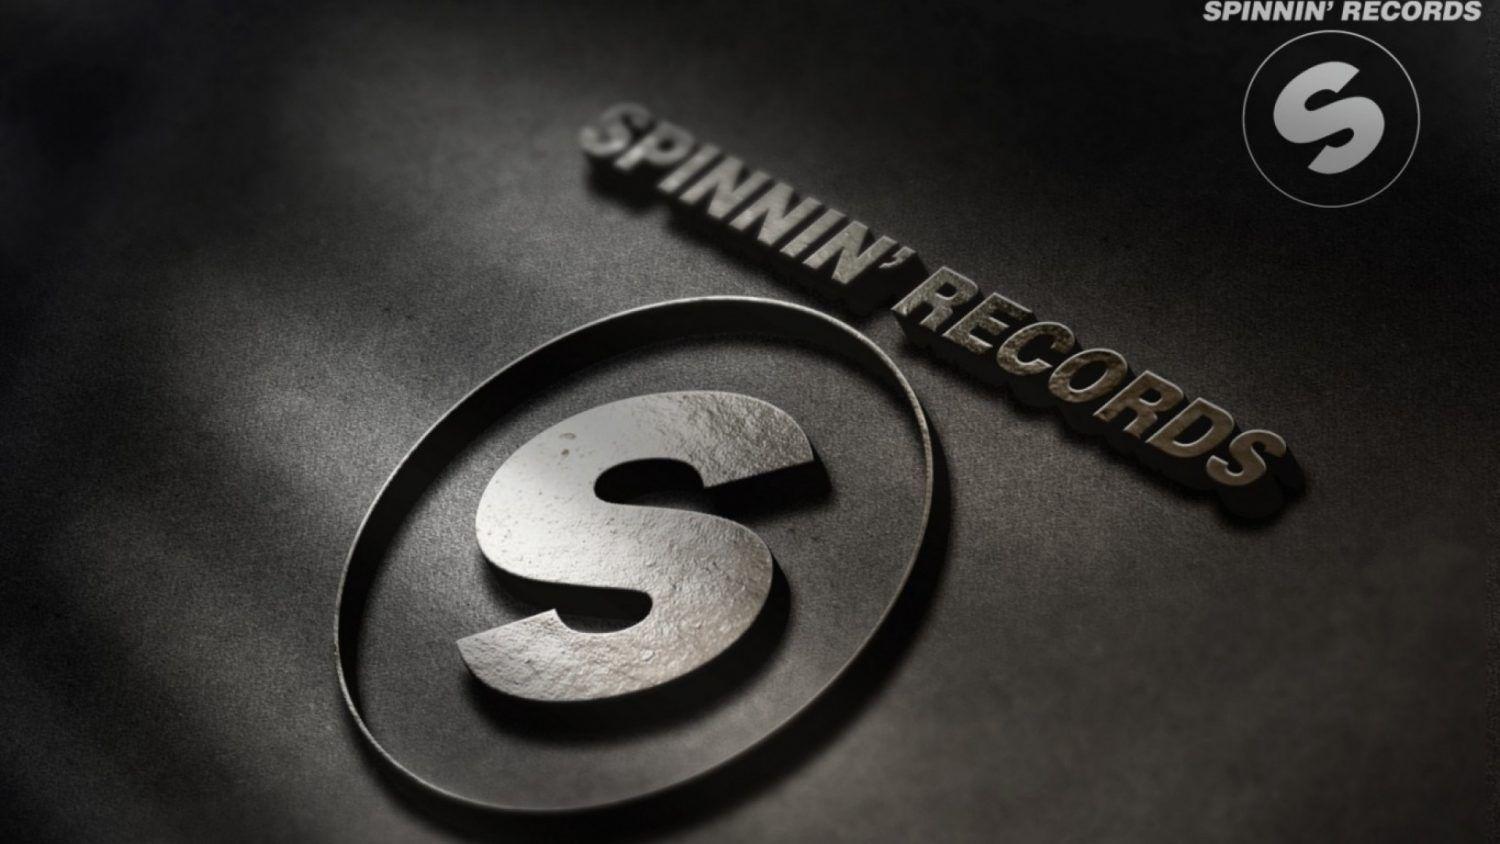 Spinnin' Records May Be up for $100 Million Sale.